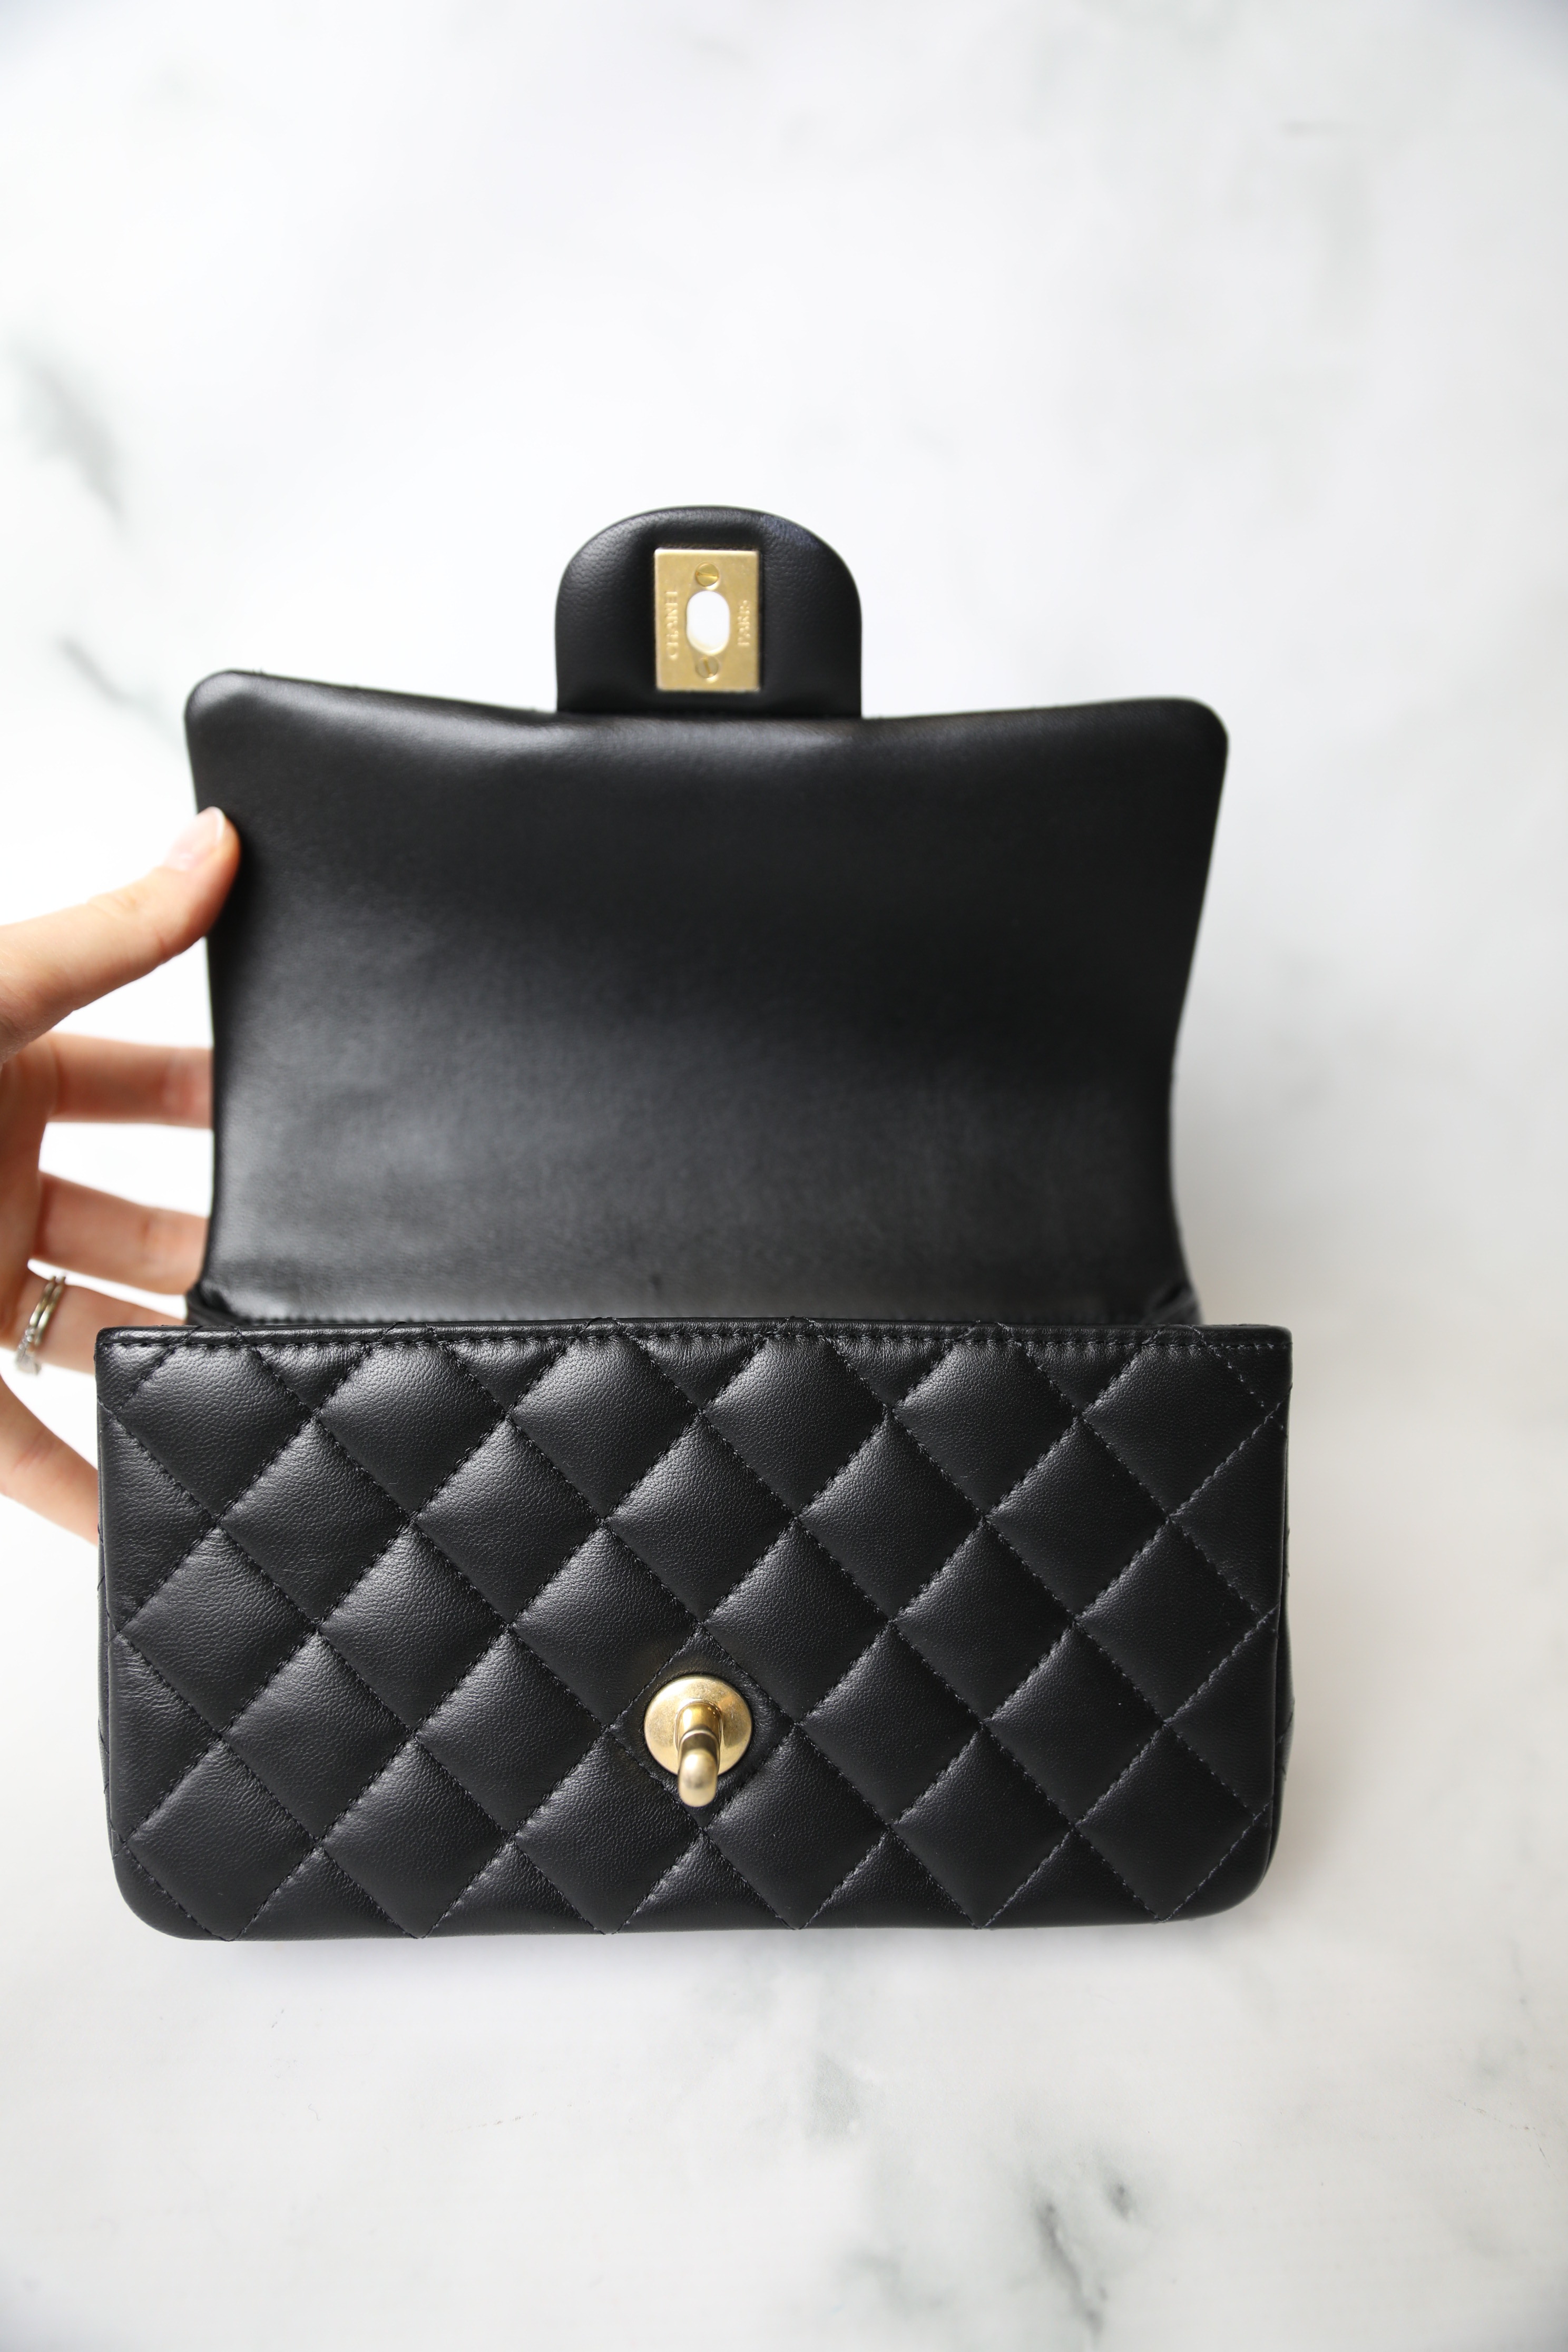 Chanel Mini with Top Handle, Black Lambskin with Aged Gold